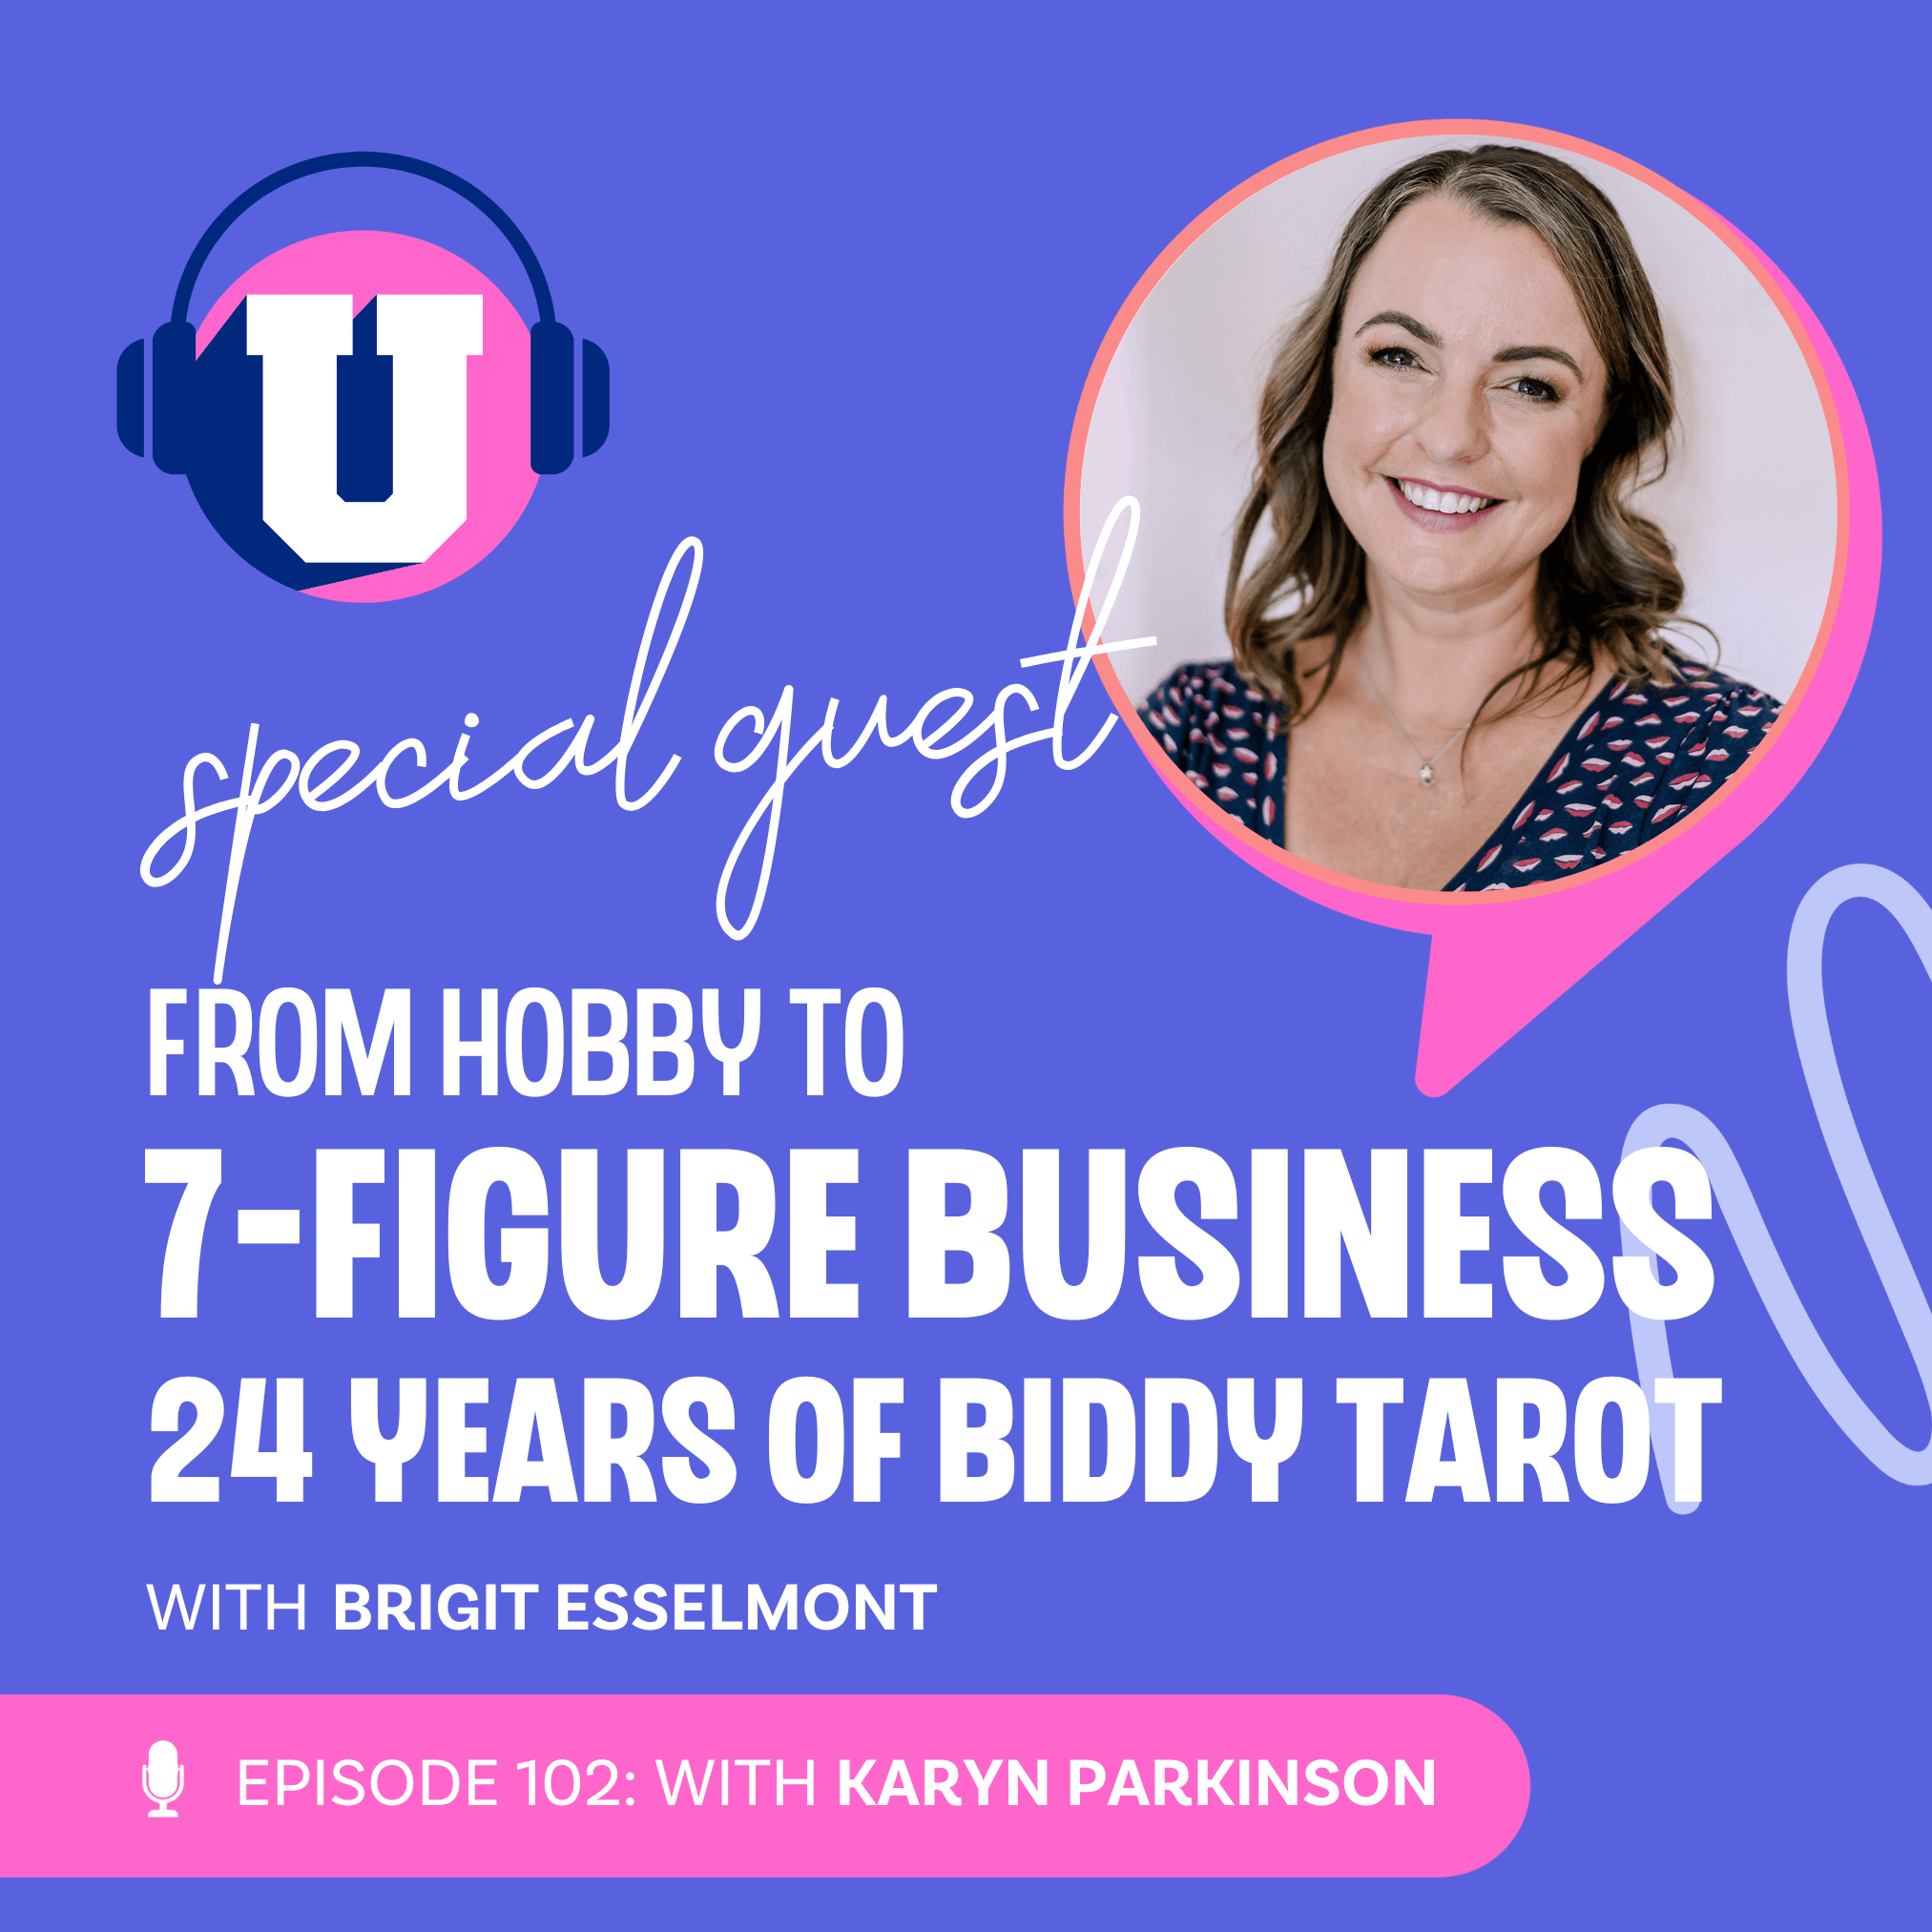 From hobby to 7-figure business: 24 years of Biddy Tarot